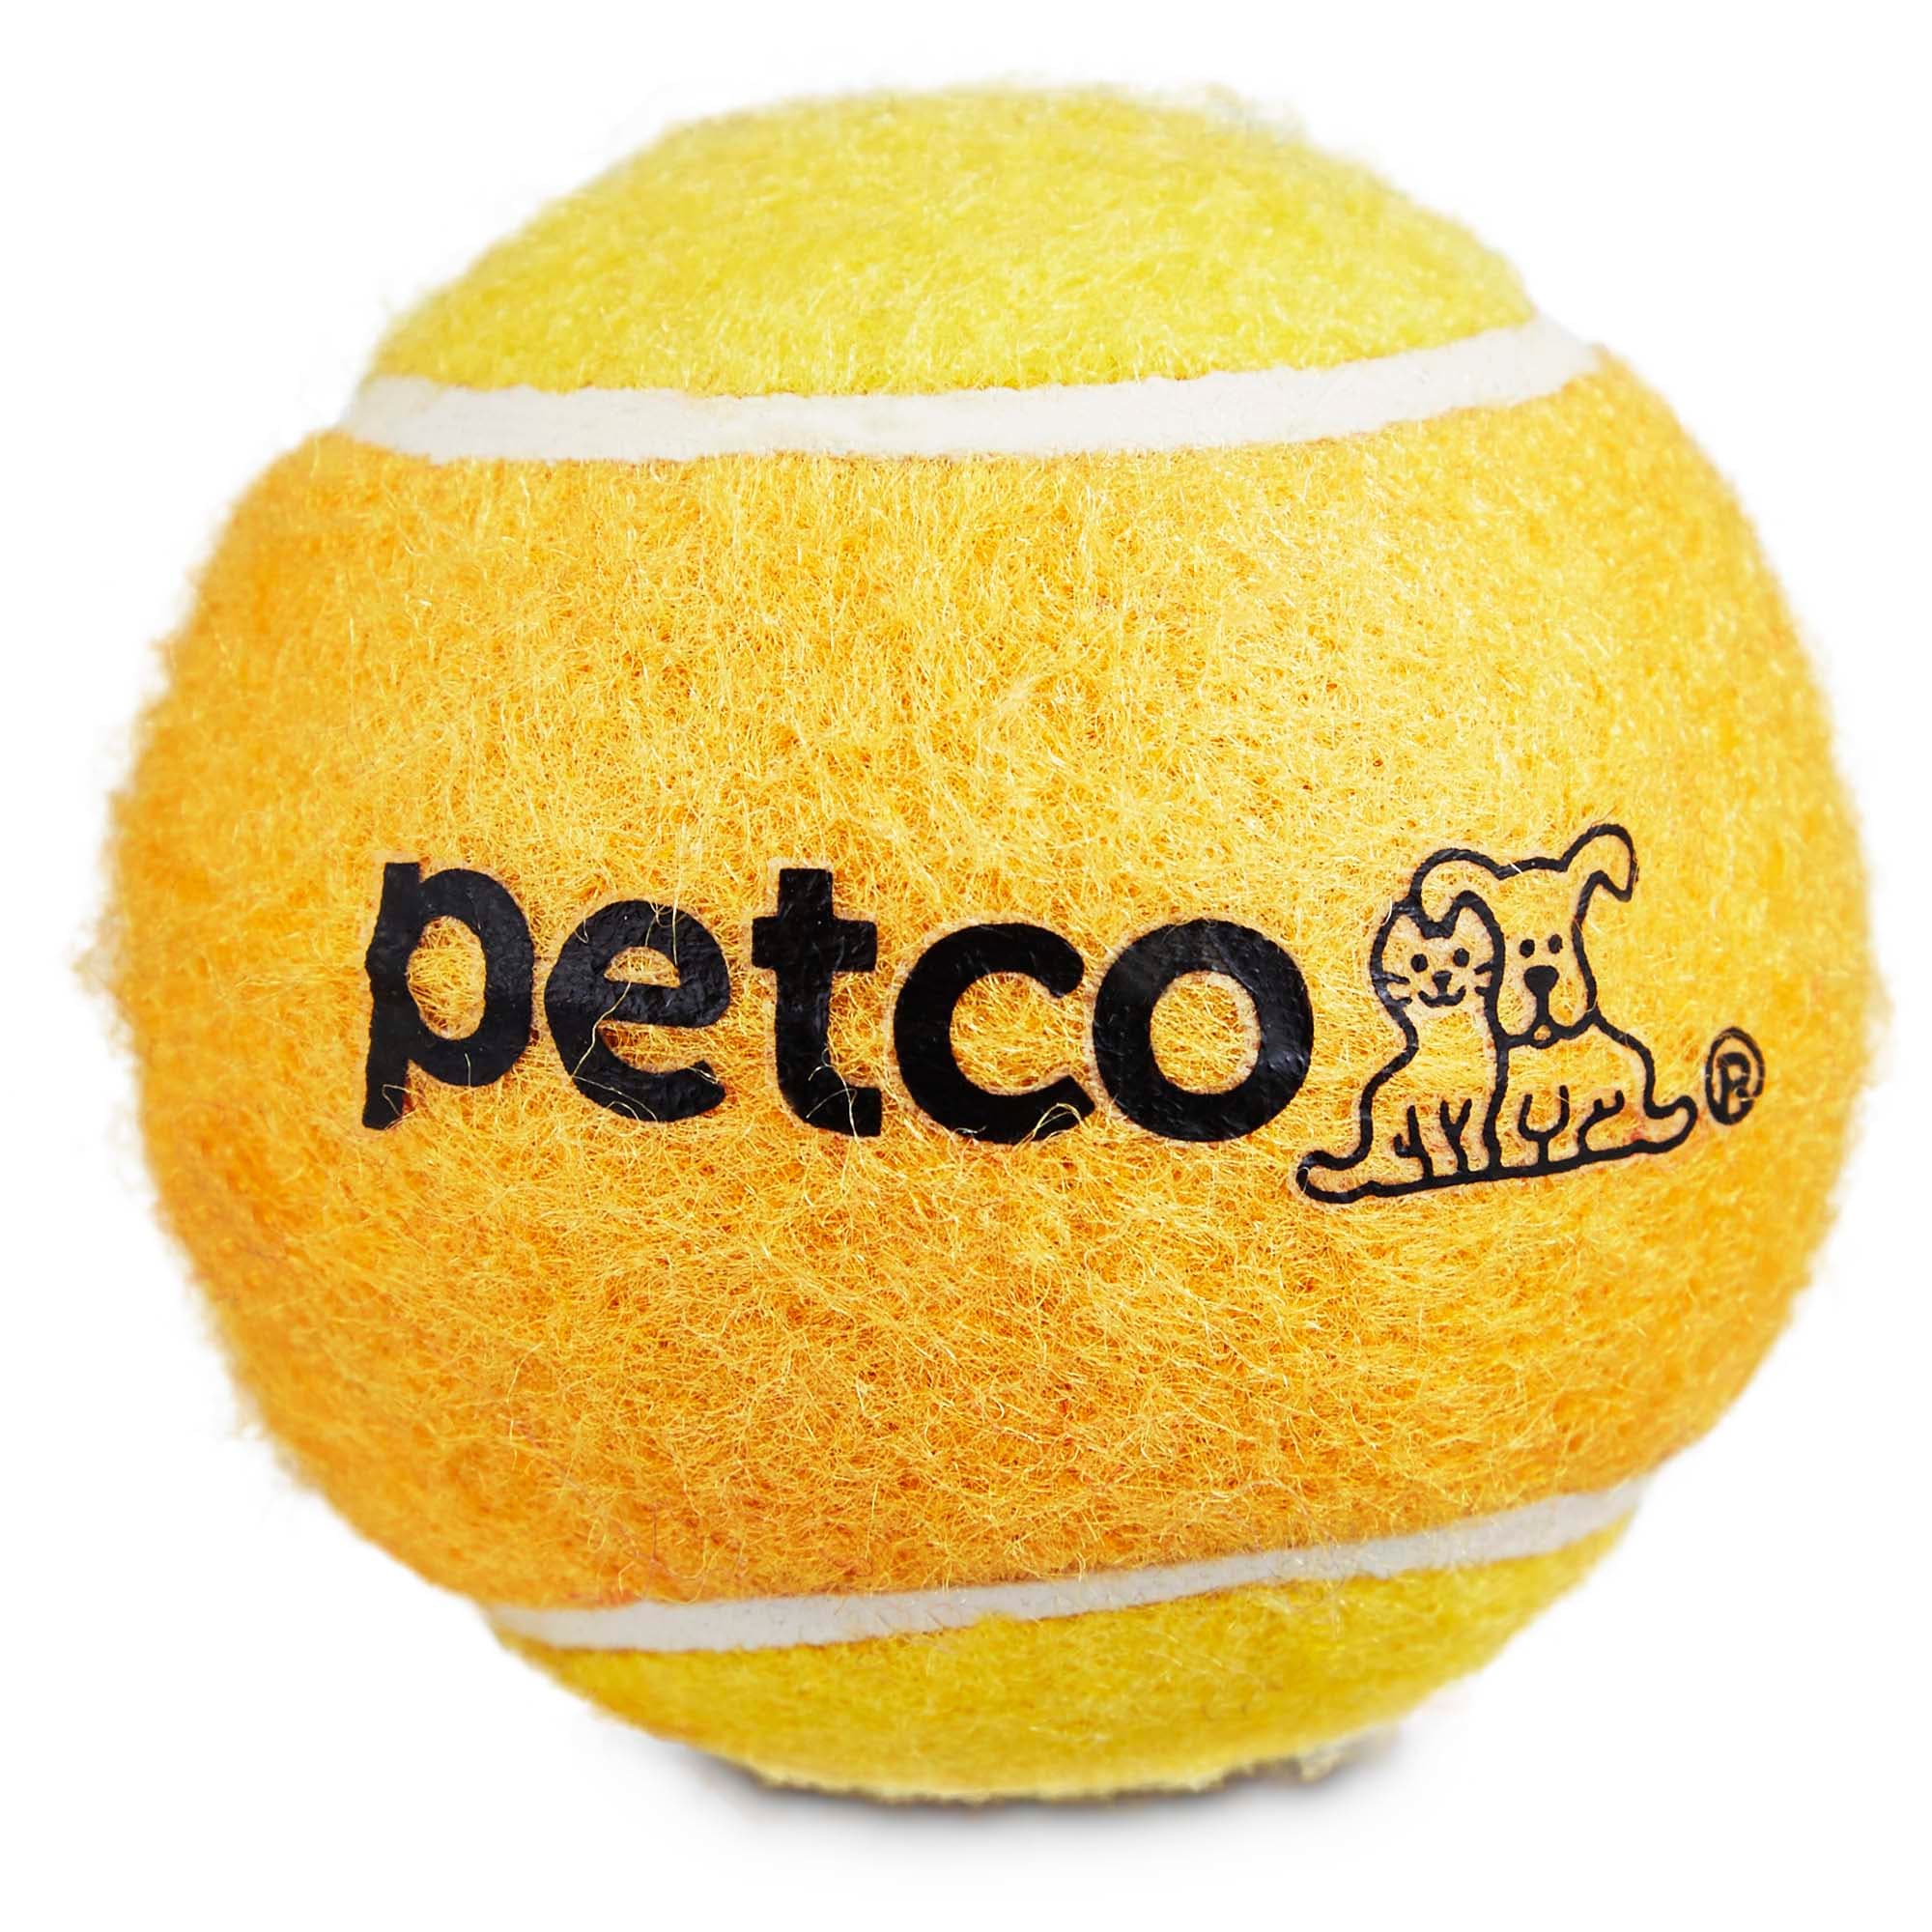 Petco Assorted Tennis Ball Dog Toy in Yellow, 2.5/